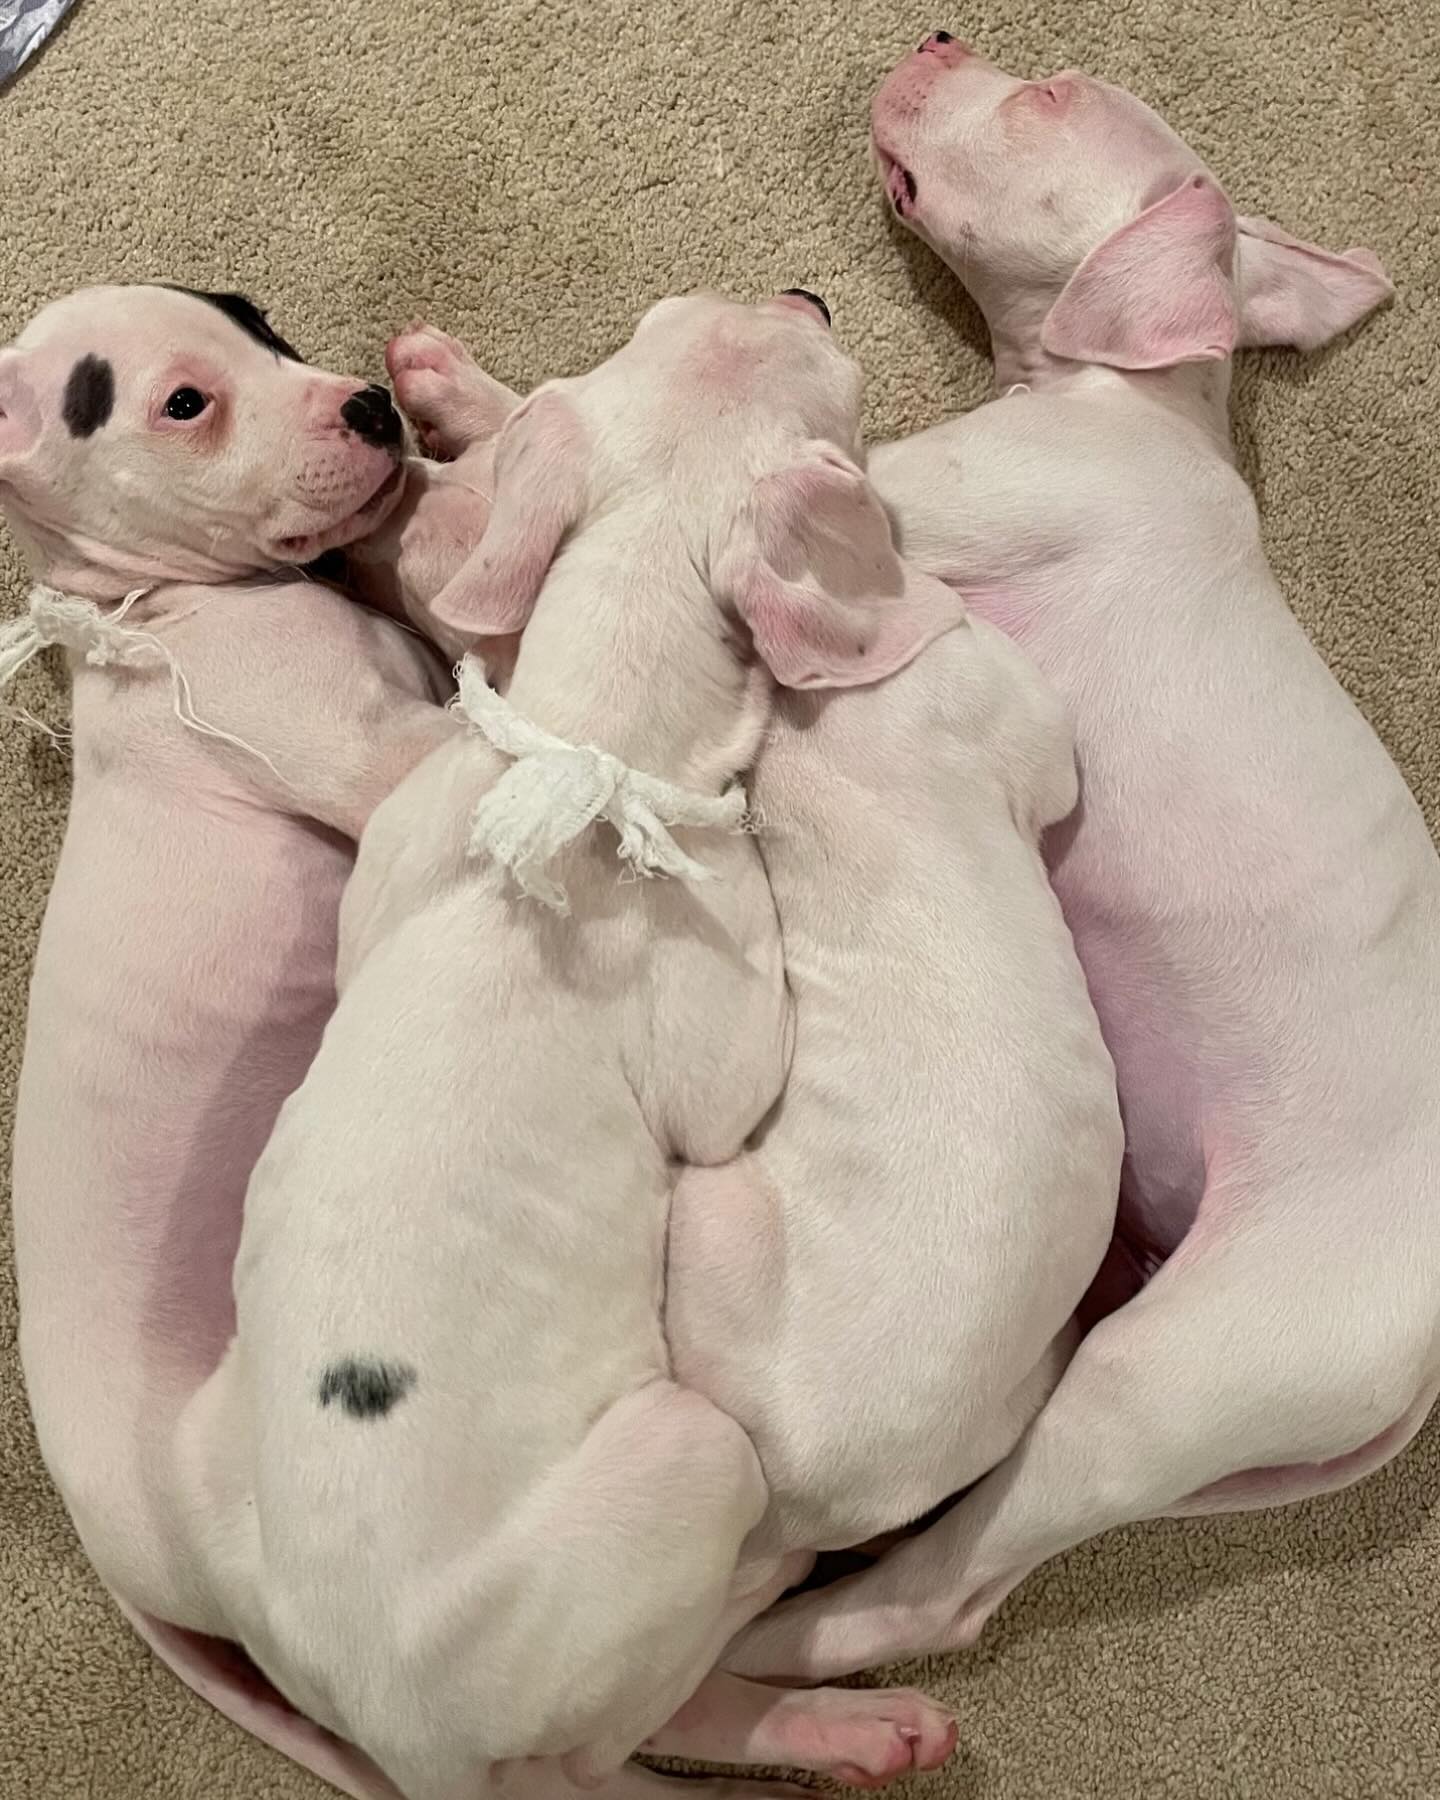 puppies lying together